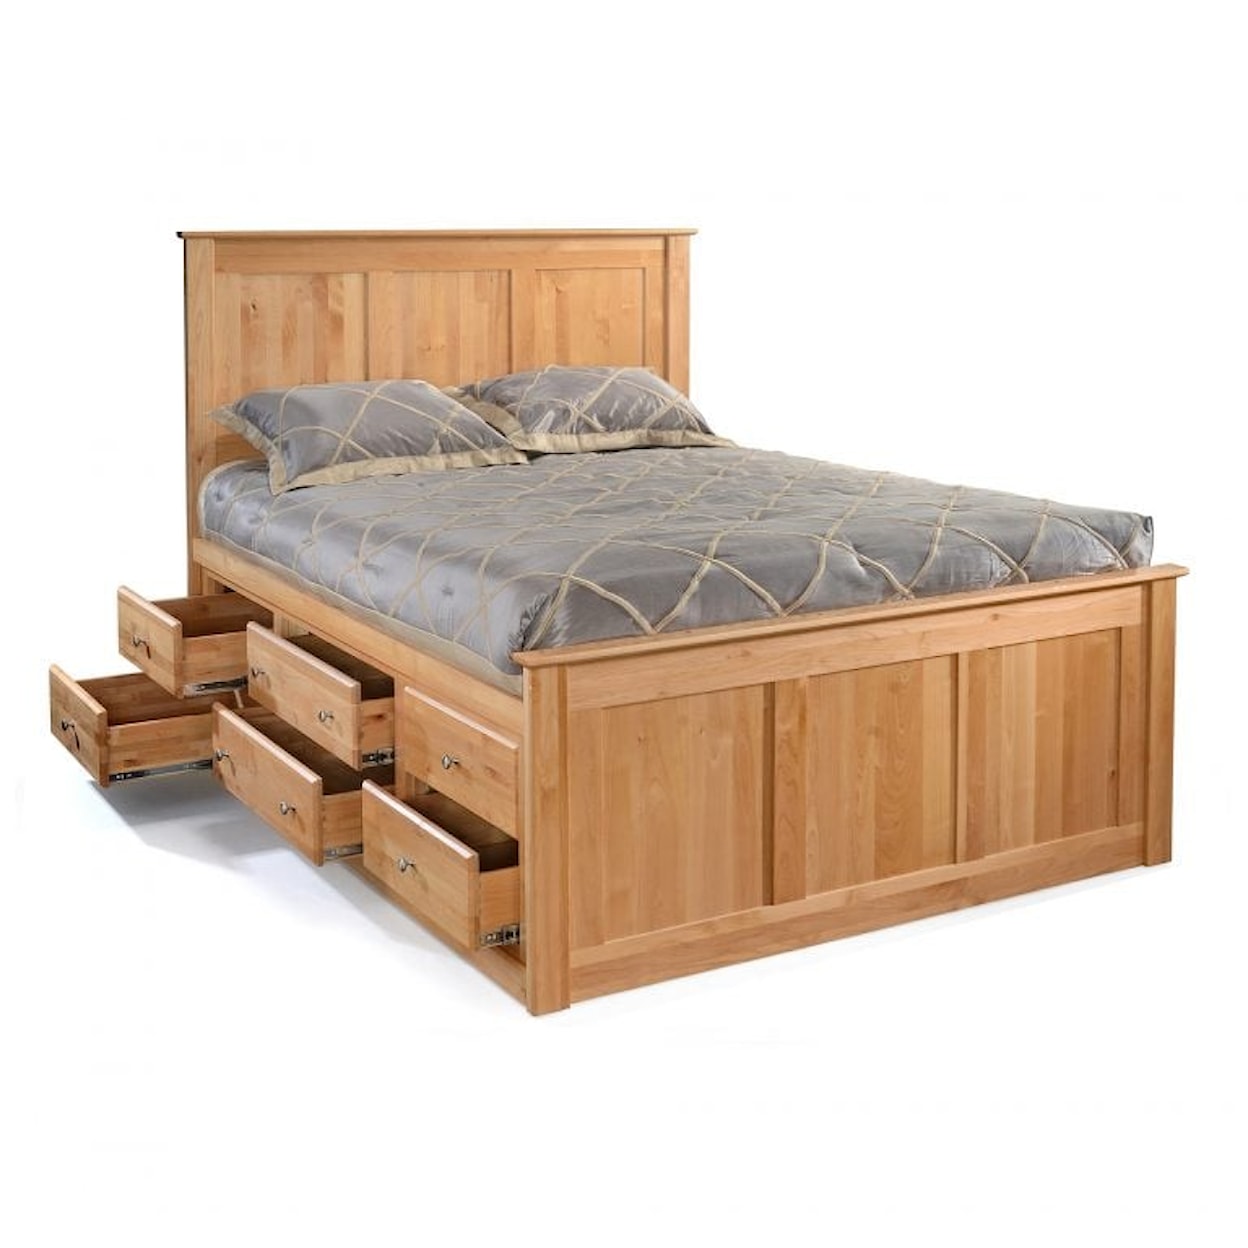 Archbold Furniture Chest Bed Full 12-Drawer Chest Bed